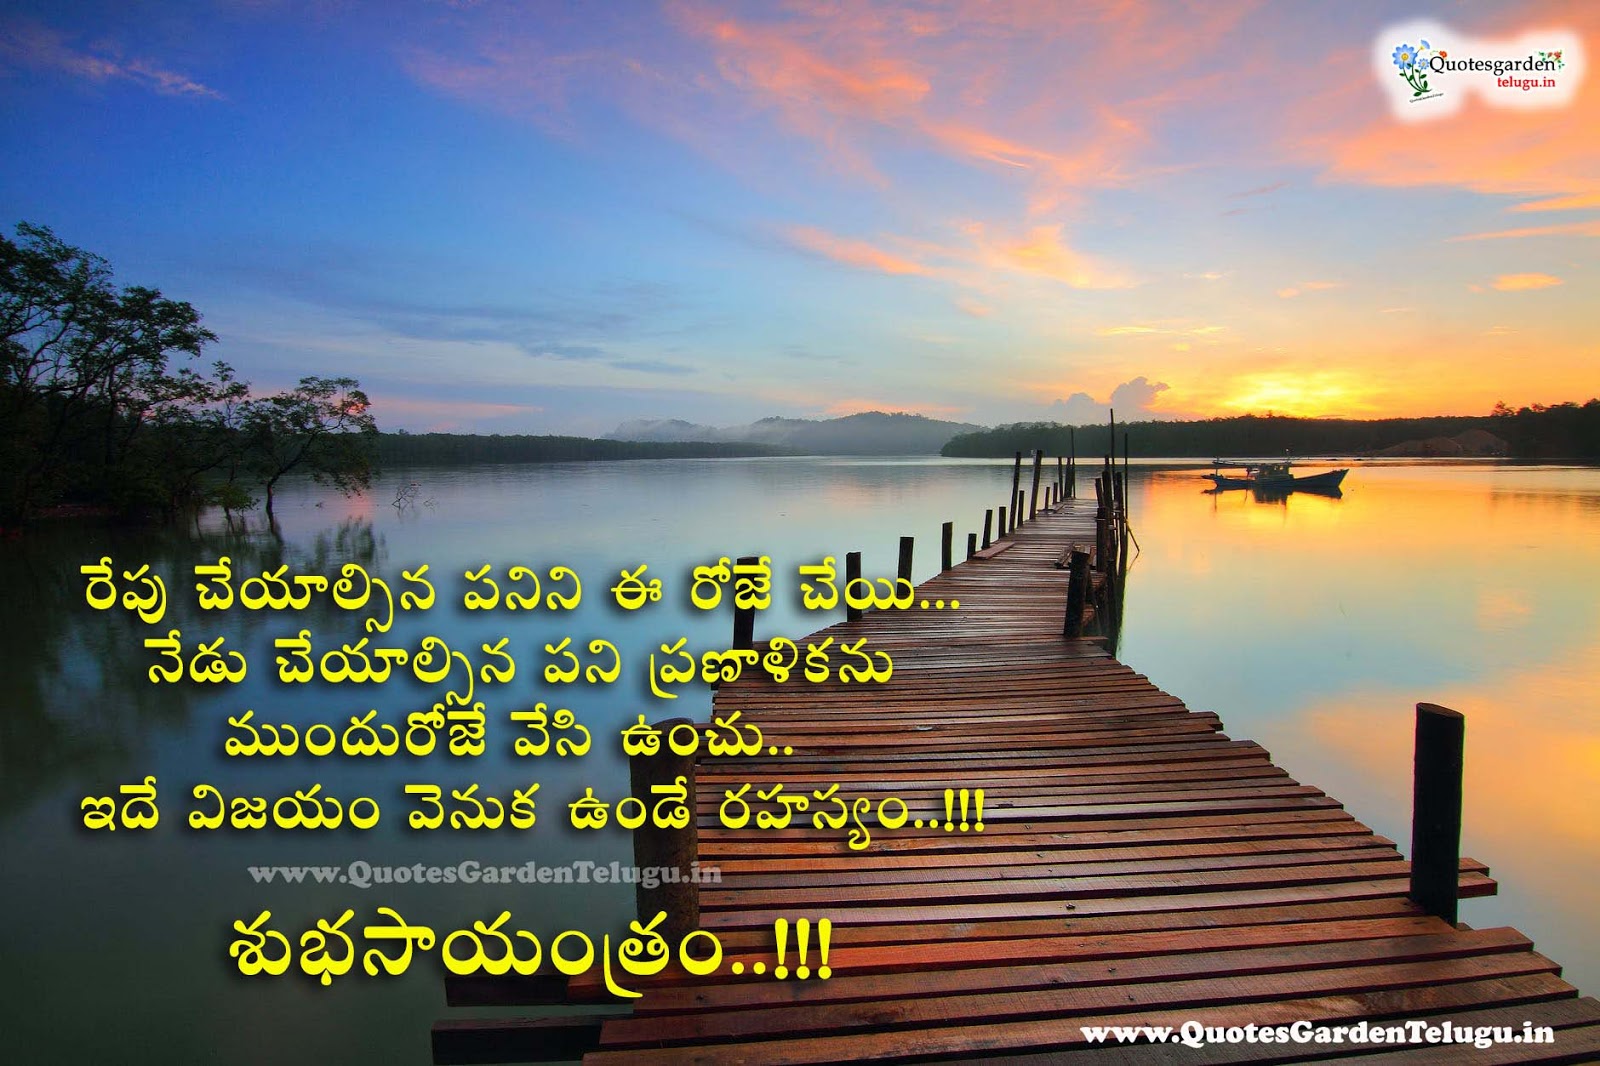 good evening images in telugu quotes messages | QUOTES GARDEN ...